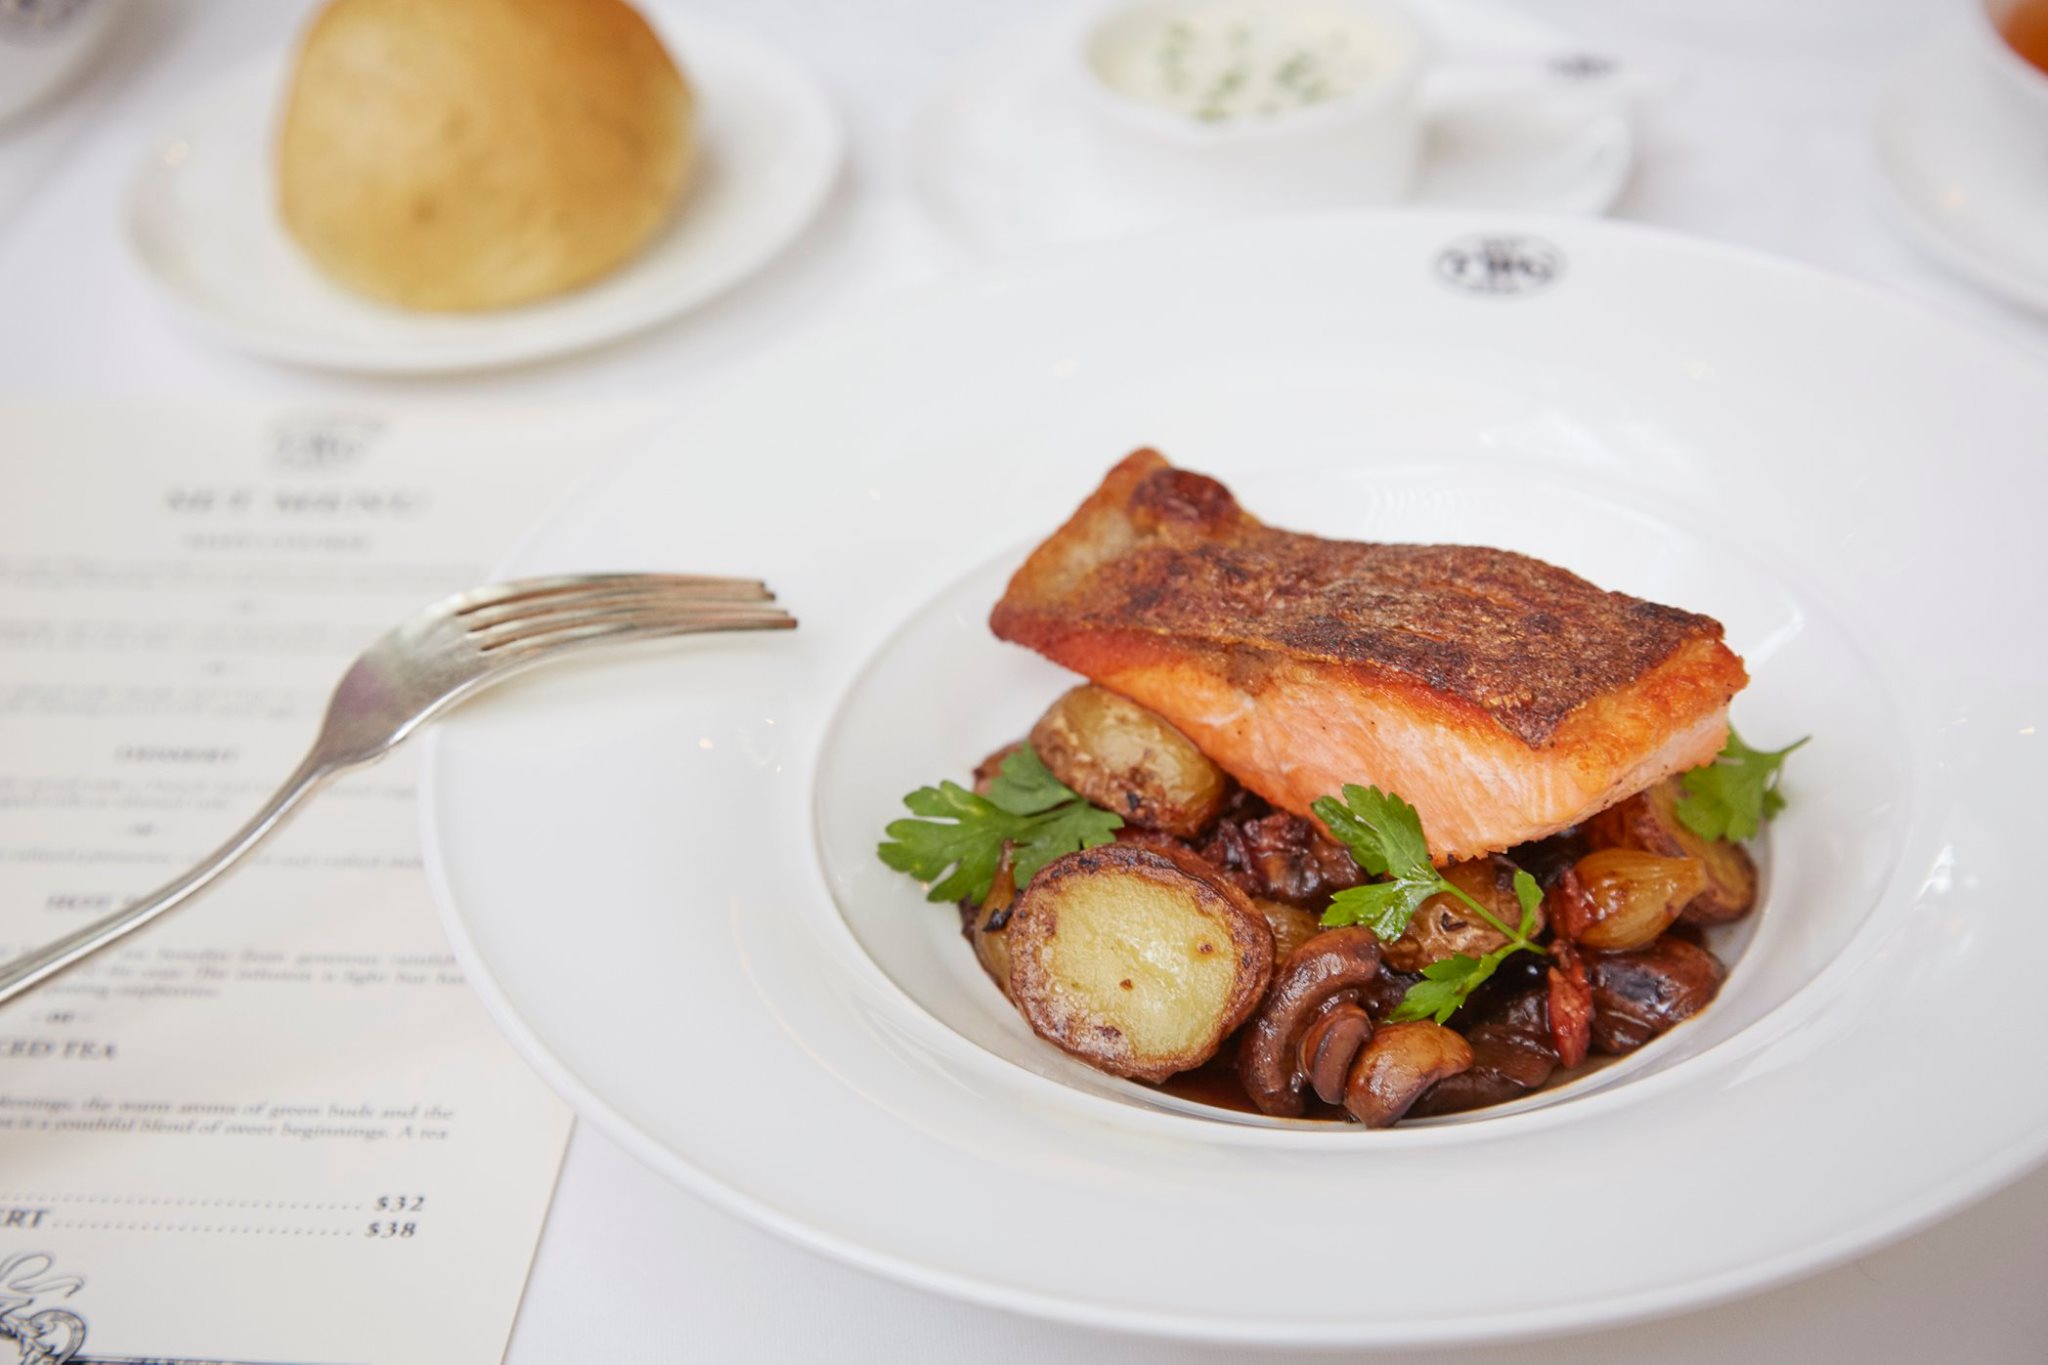 Salmon in a Burgundy red wine sauce and horseradish cream, accompanied by sautéed potatoes infused with Lu An Gua Pian, caramlised pearl onions, veal bacon and mushrooms on this week's Set Menu. Available at all TWG Salons in Singapore.